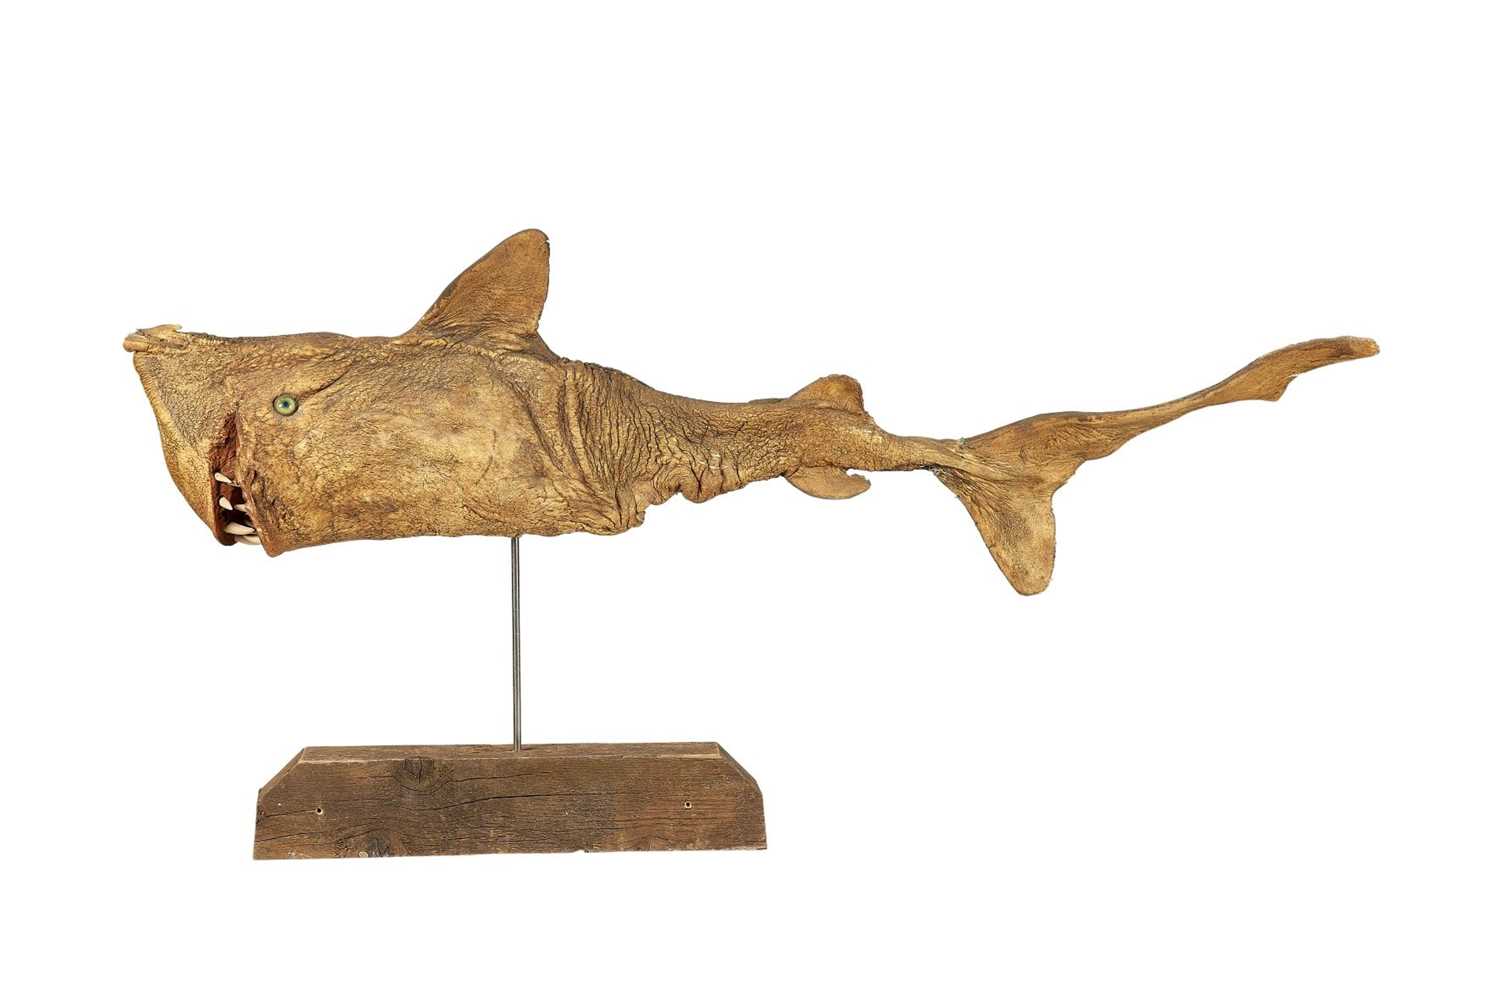 A LIFE-SIZE PAINTED MODEL OF A DEFORMED SHARK - Image 2 of 2